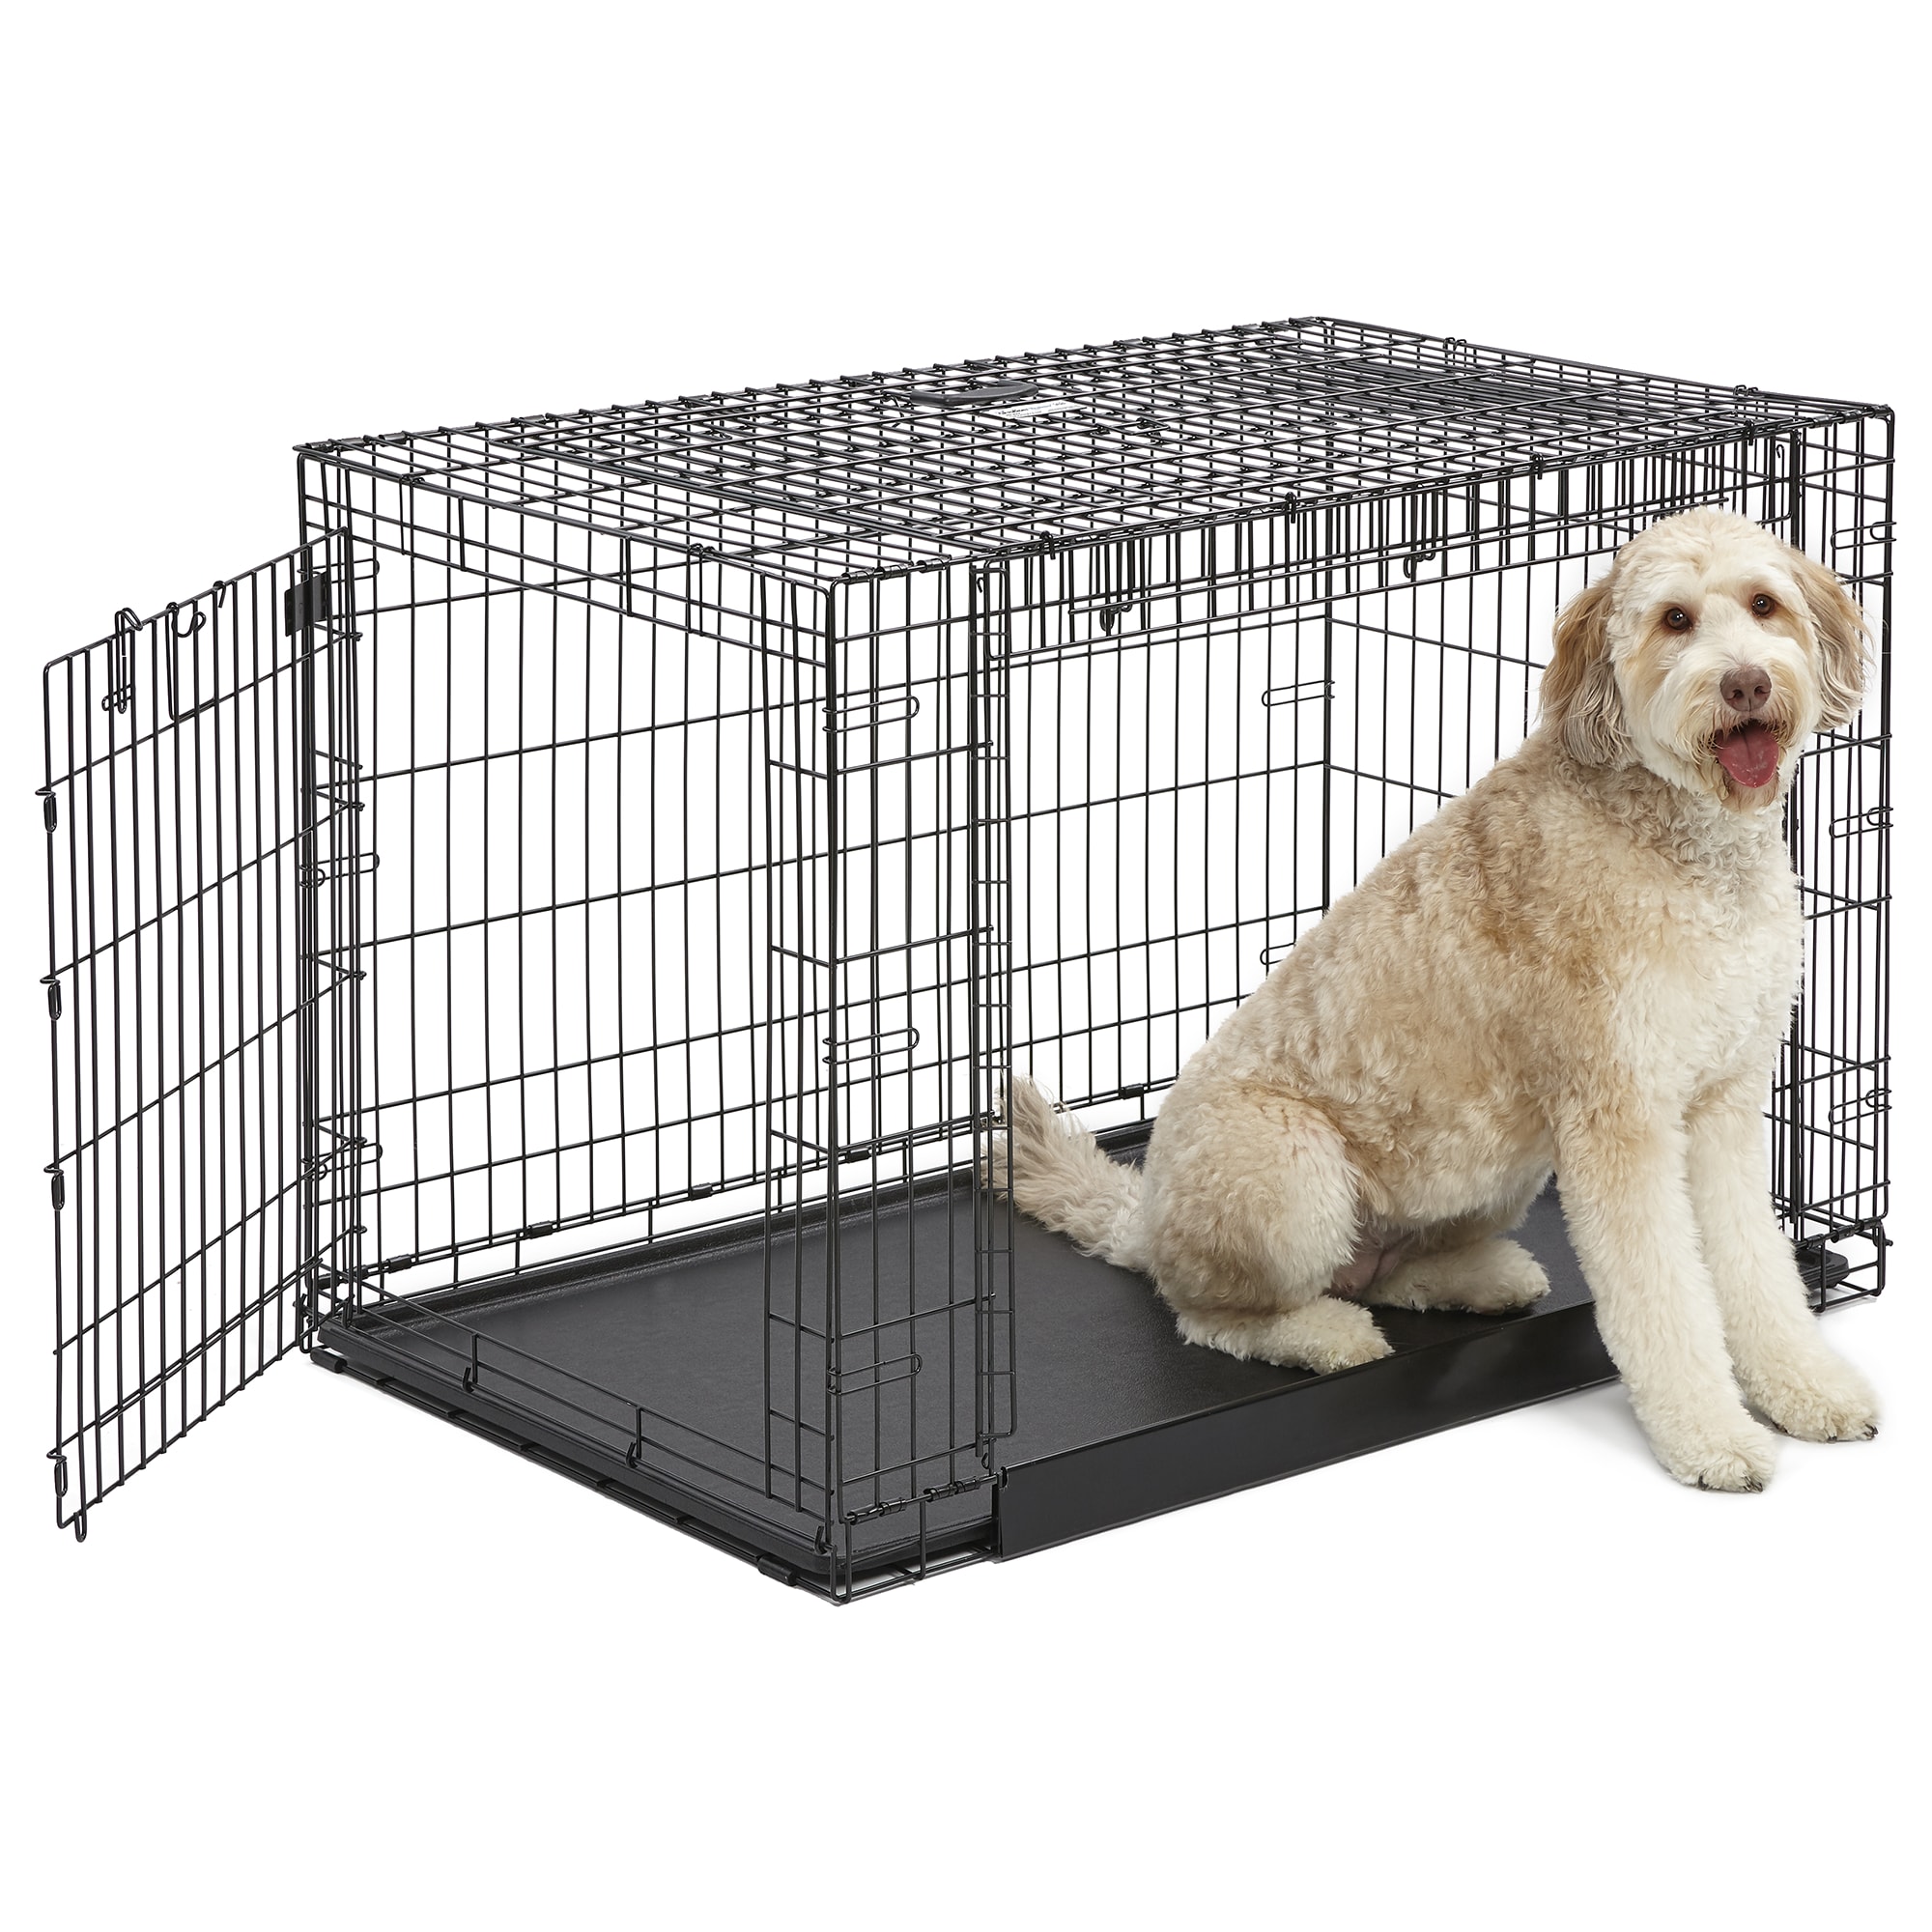 Midwest Ovation Trainer Double Door Dog Crate, 49" L X 31" W X 33" H Petco